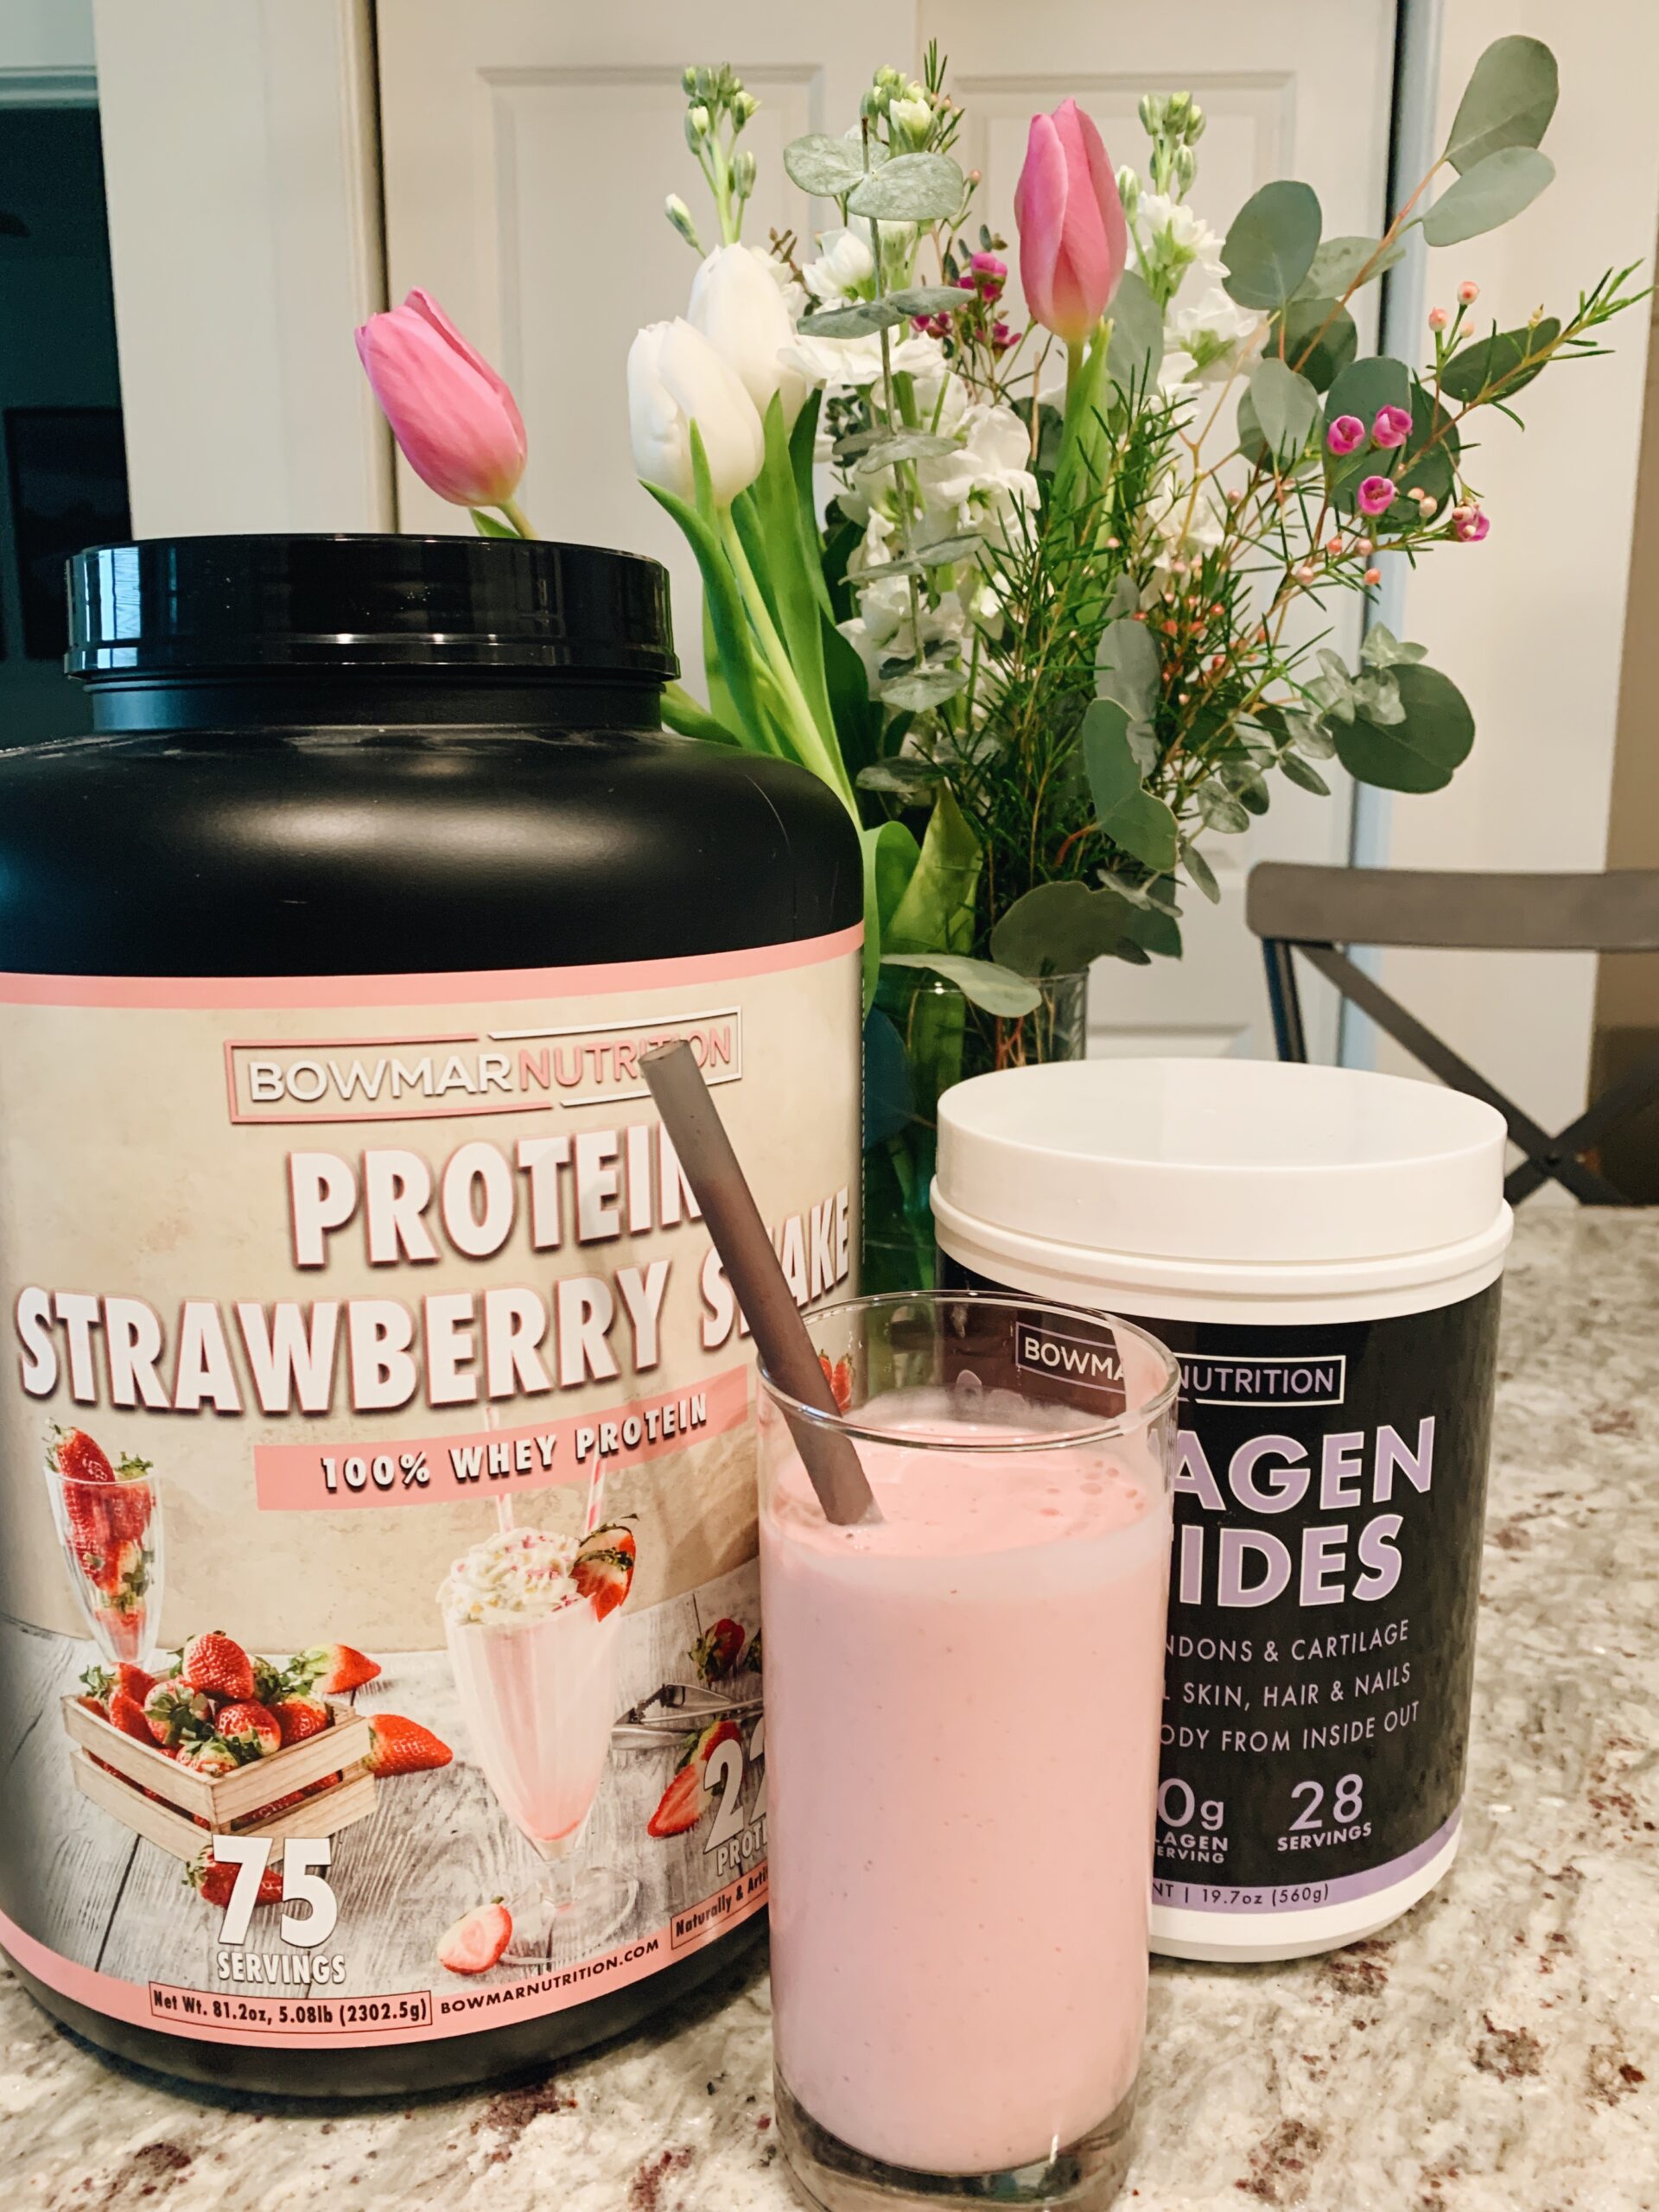 Bowmar Nutrition Strawberry Protein Smoothie